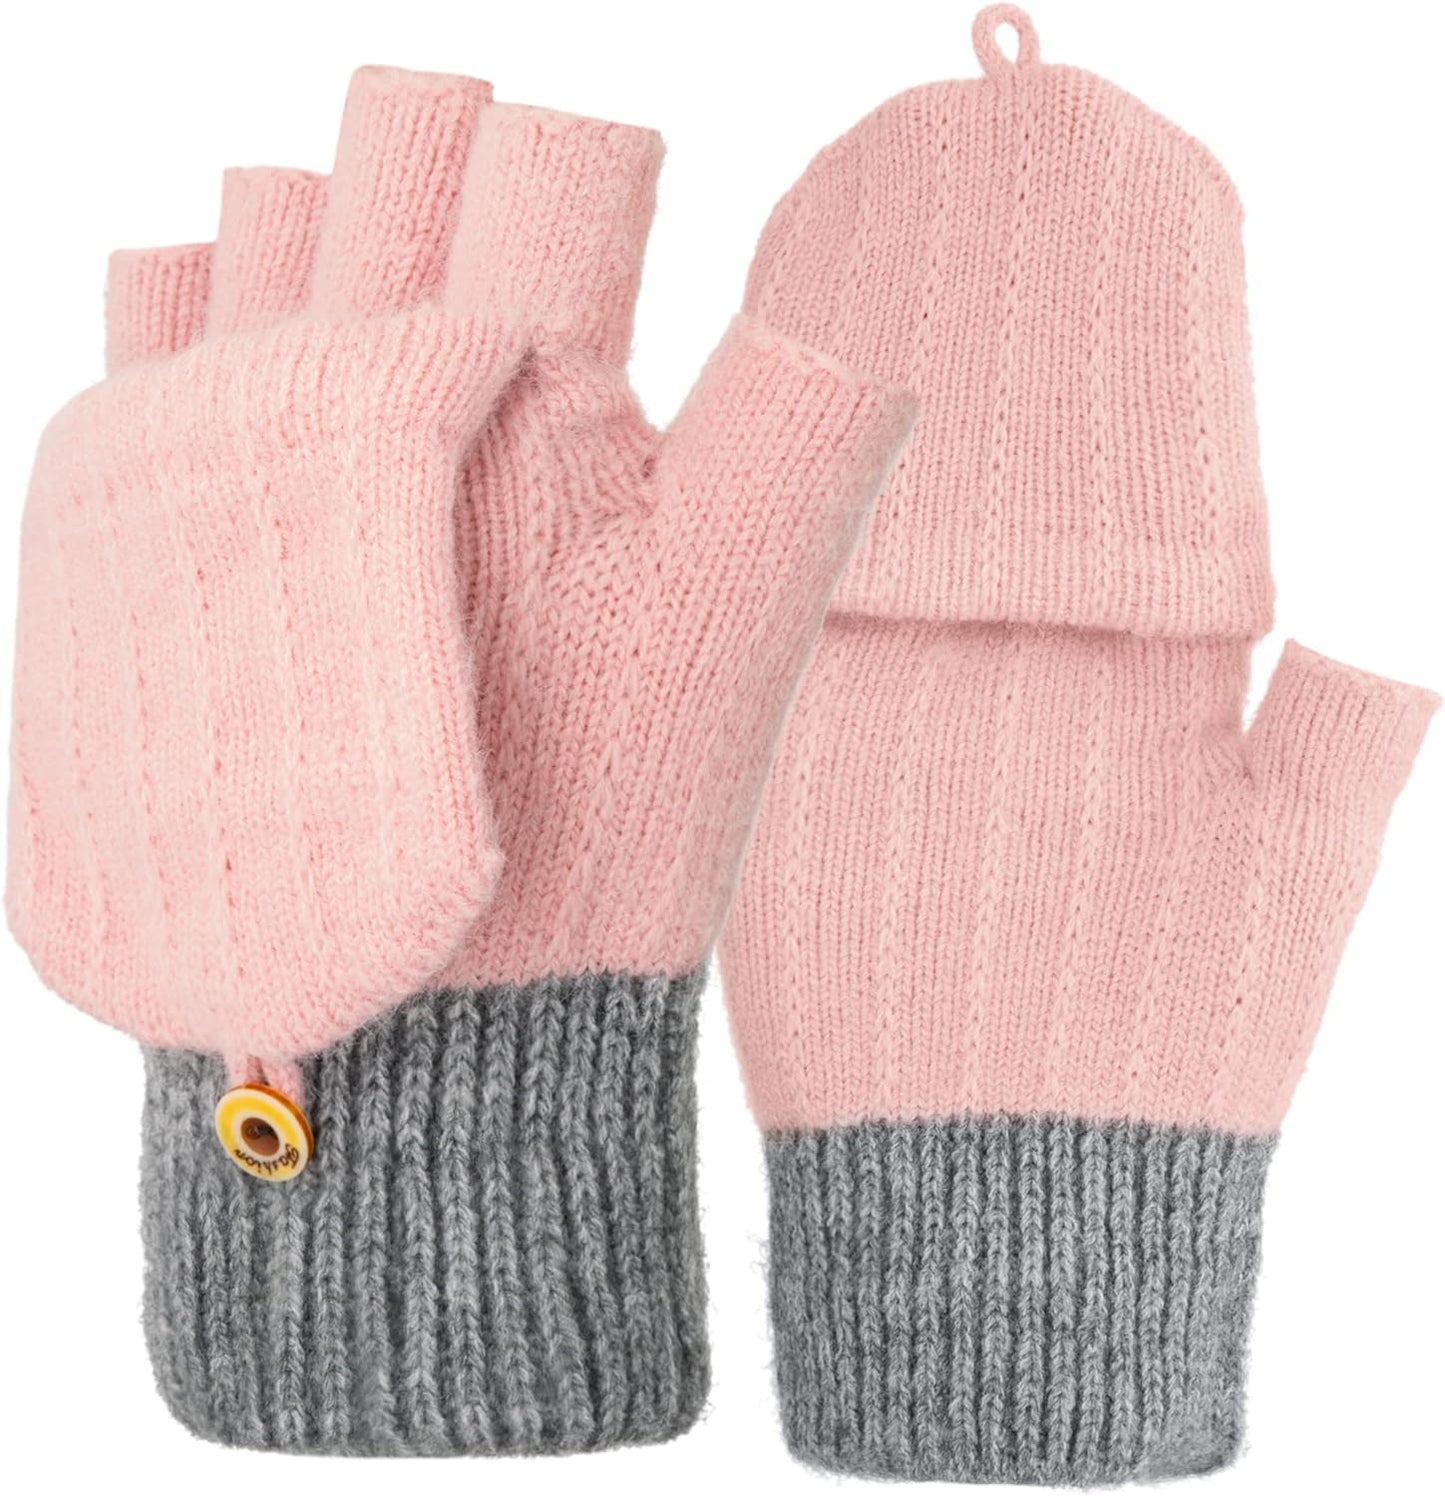 Touchscreen Women Winter Gloves | Thermal Gloves| Knitted Hand Warmers | Windproof Typing Gloves for Cycling Skiing Hiking | Ladies Gloves Winter Gloves for Women Gloves Winter